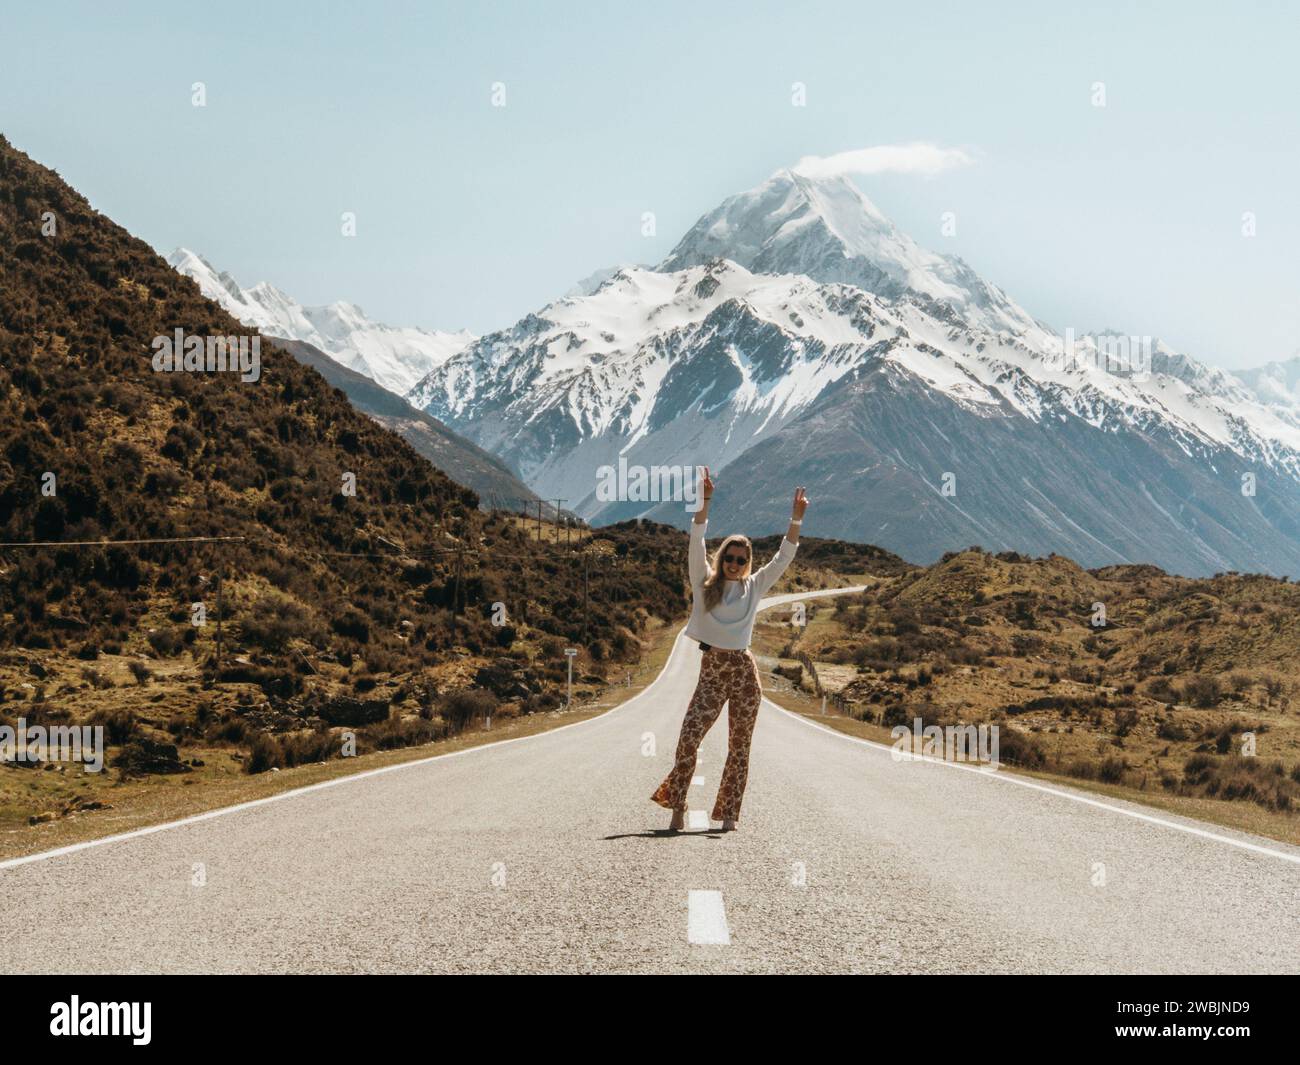 Carefree girl walking on the road to Mt Cook, New Zealand wearing bohemian clothing. Stock Photo